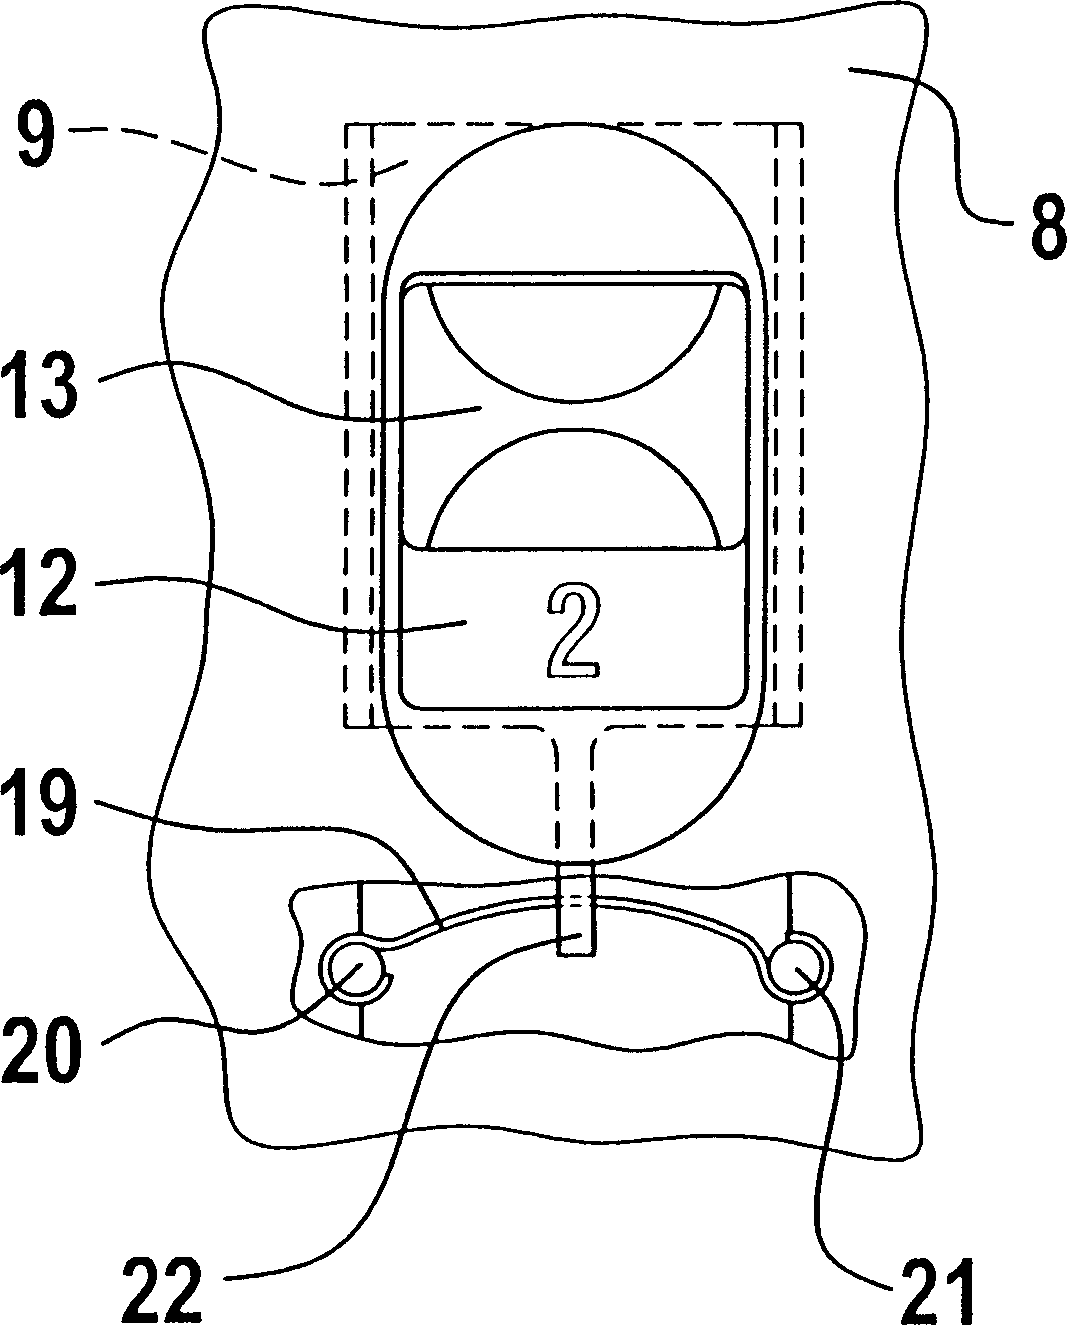 Two-stage speed variator device for converting electric tool